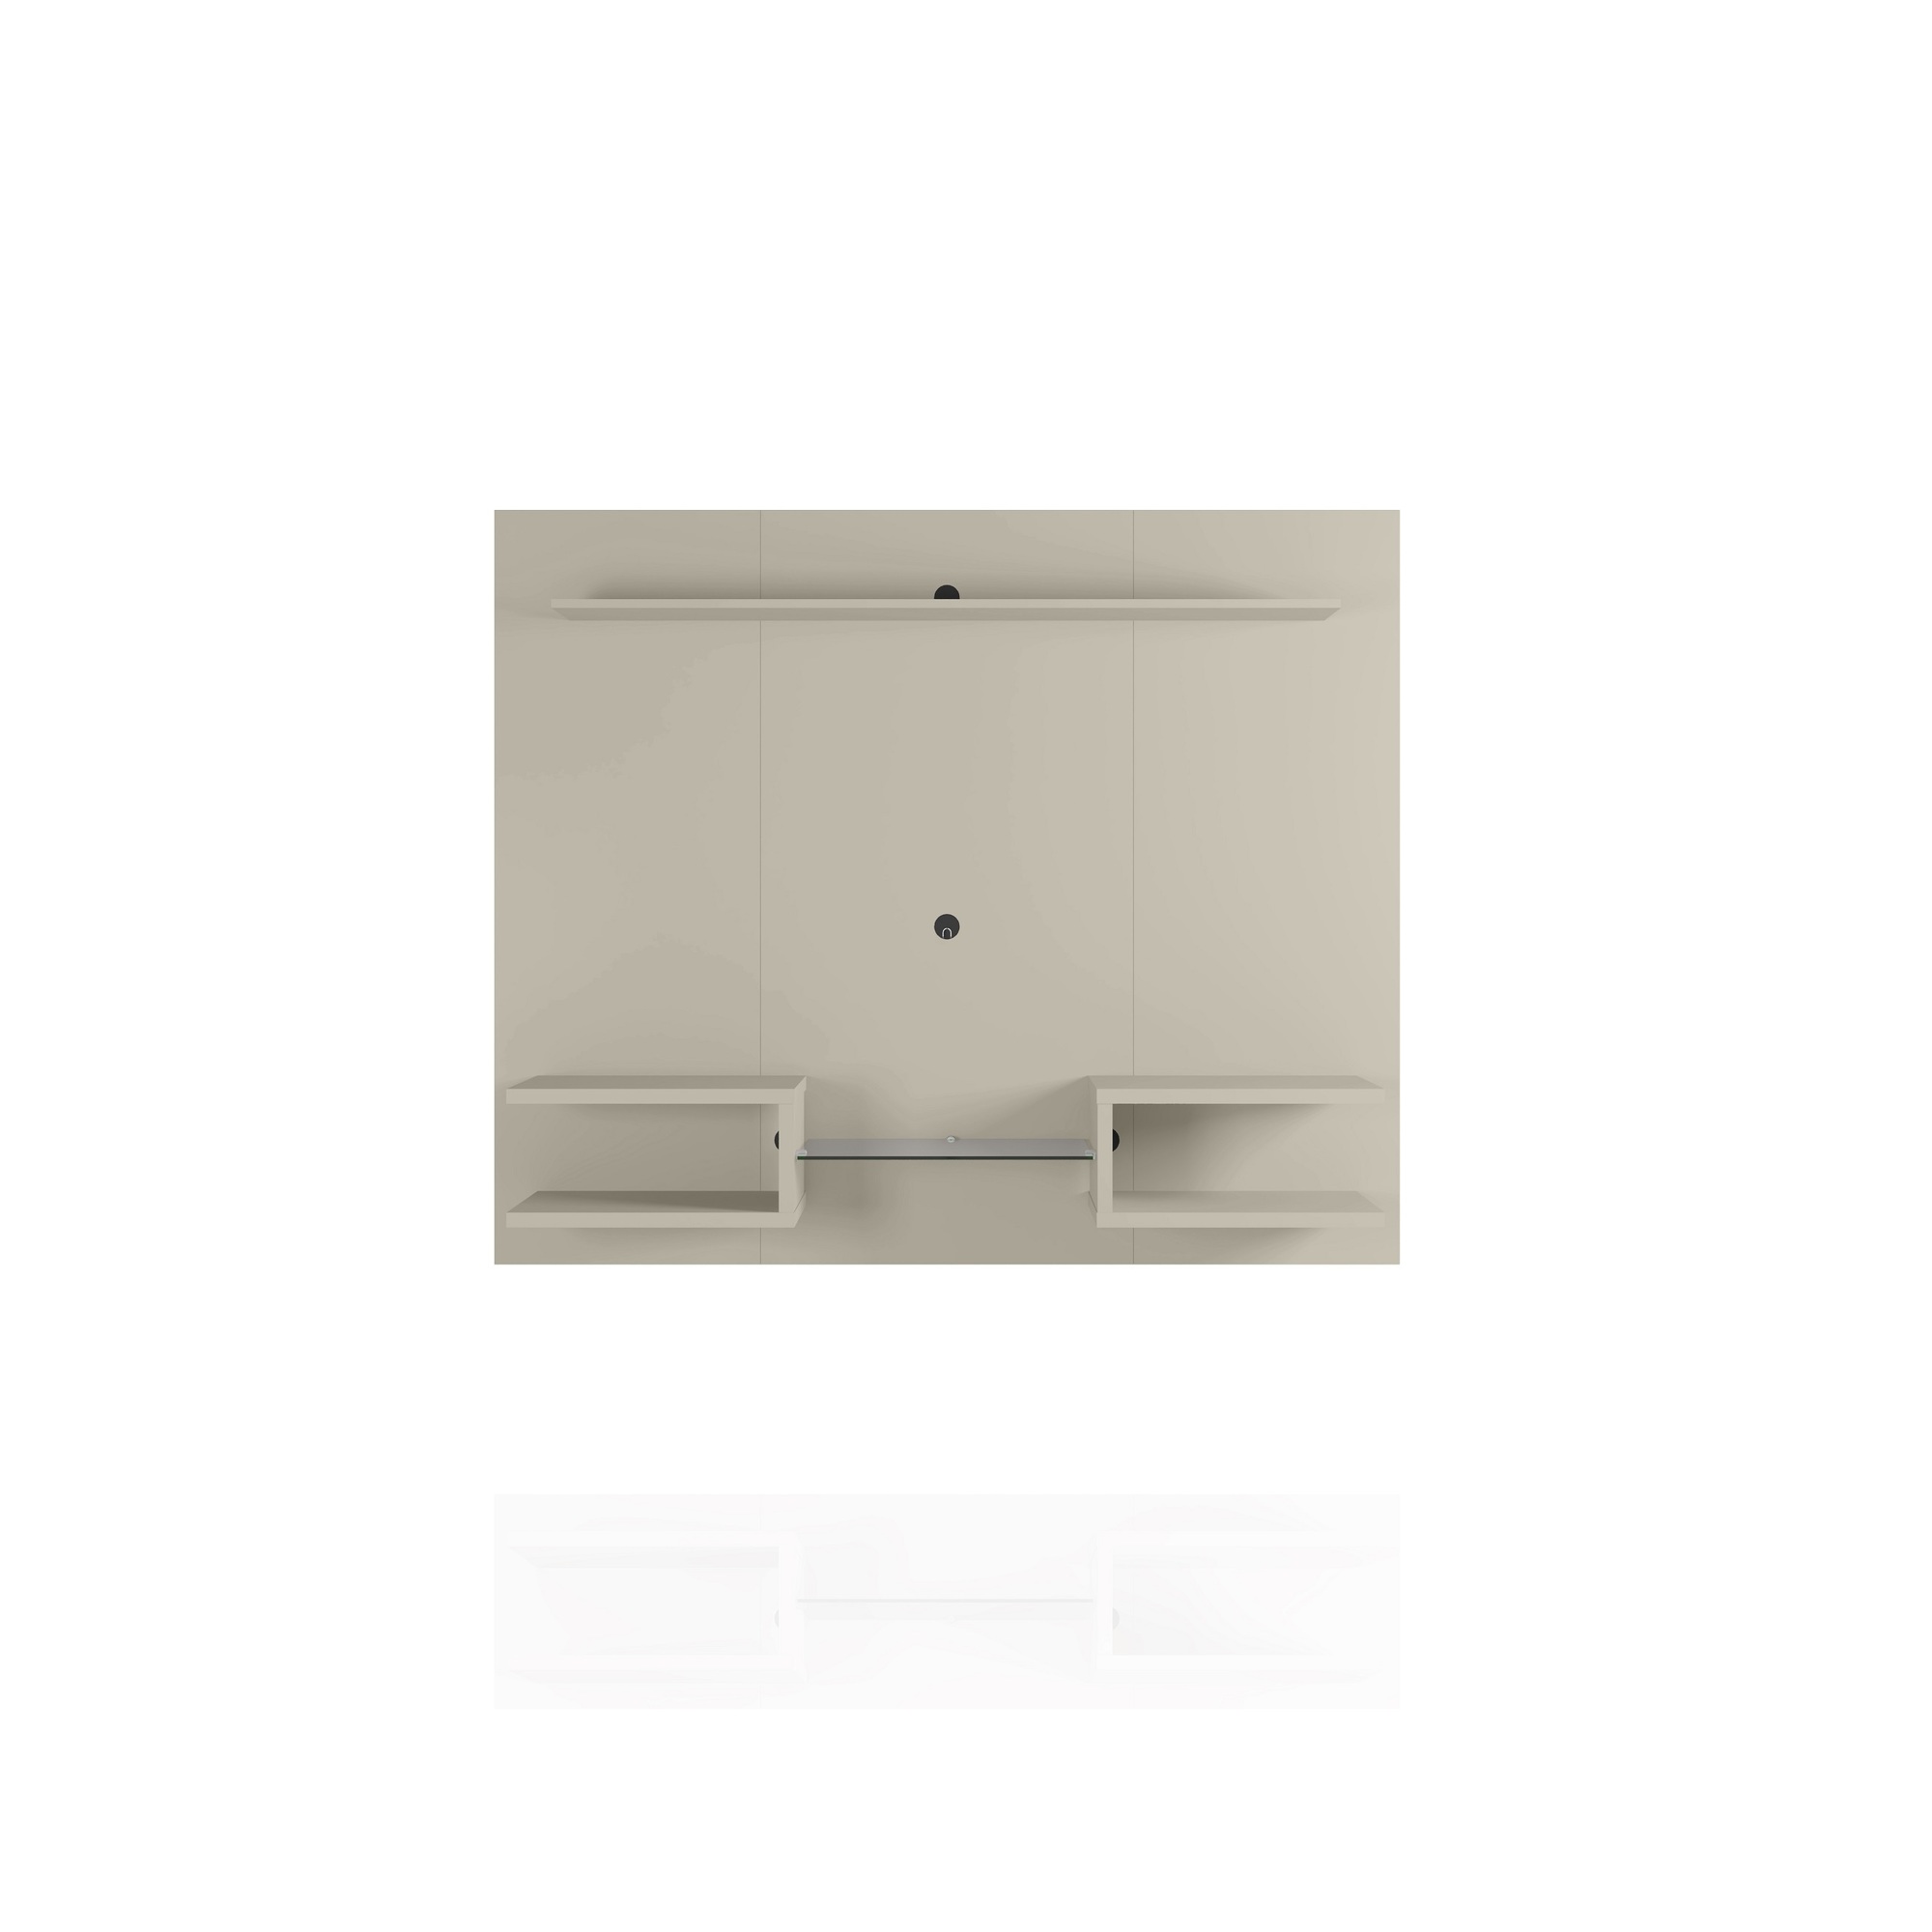 Manhattan Comfort, Plaza Modern Floating Wall Ent Cntr Off White, Width 64.25 in, Height 53.54 in, Depth 11.65 in, Model 224BMC